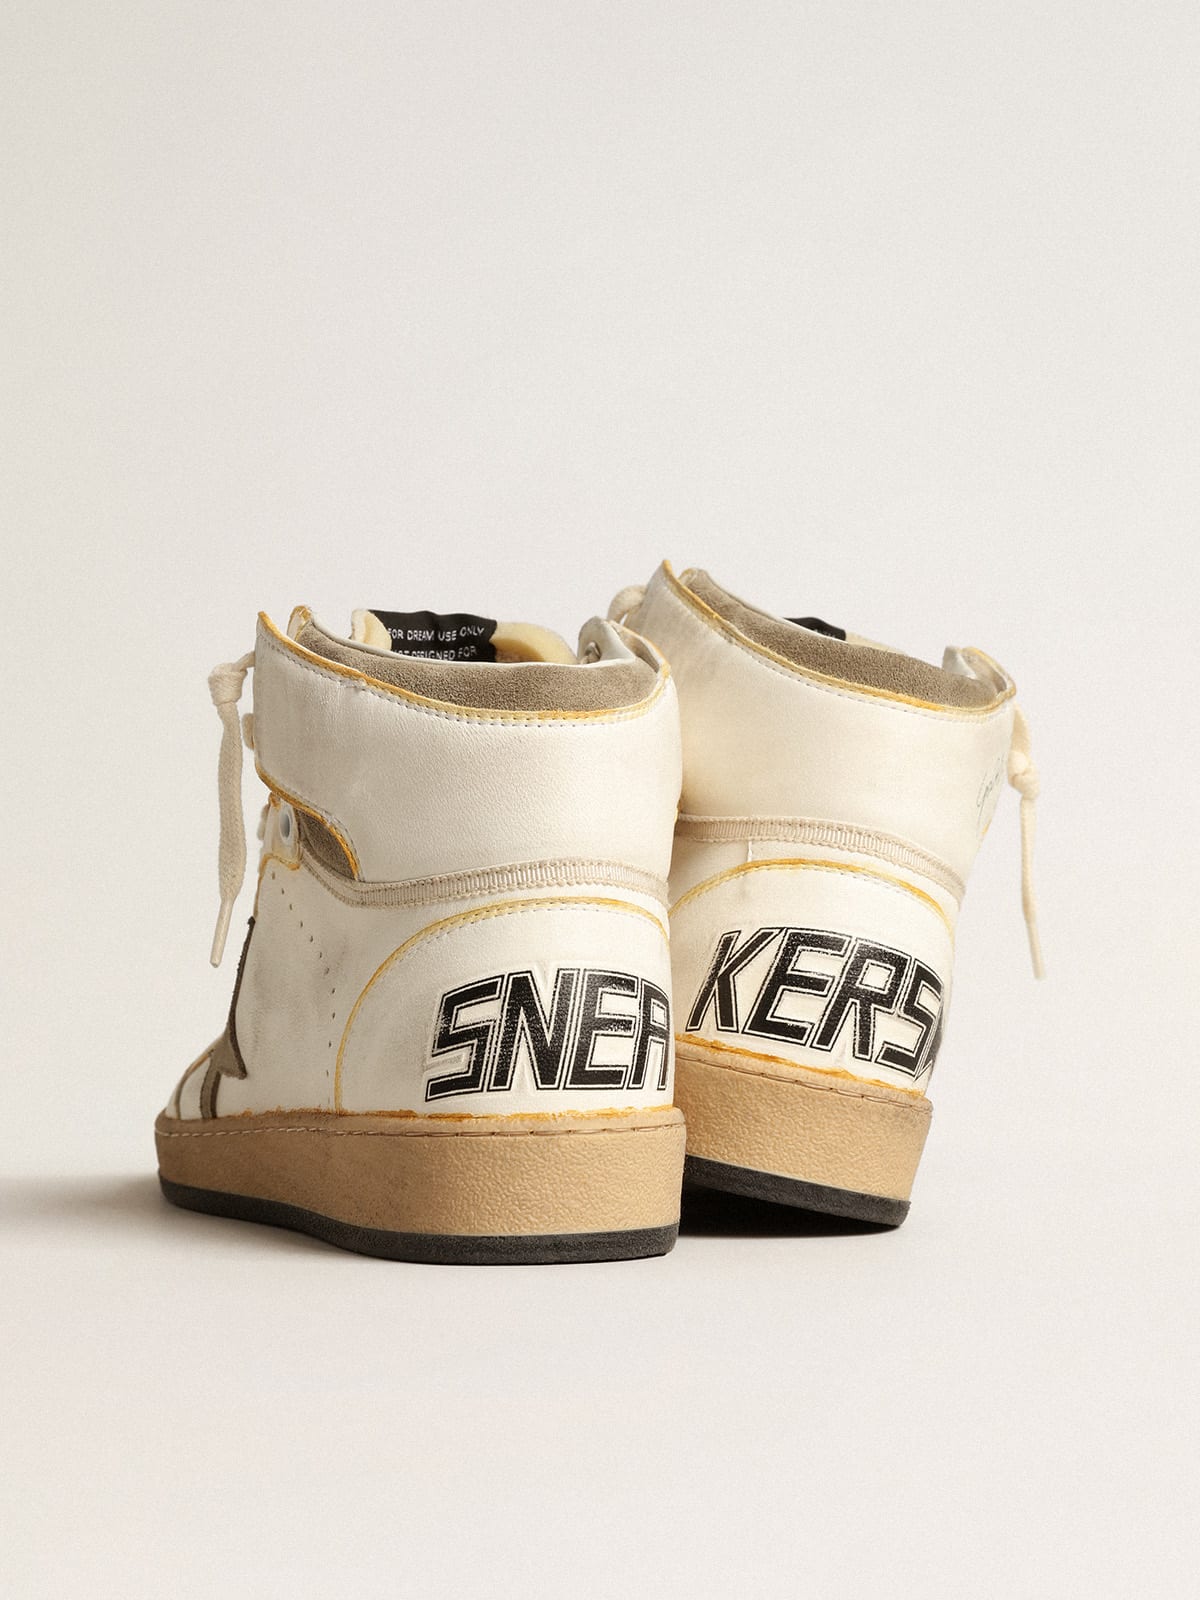 Golden Goose - Men’s Sky-Star in white nappa leather with dove-gray suede star in 